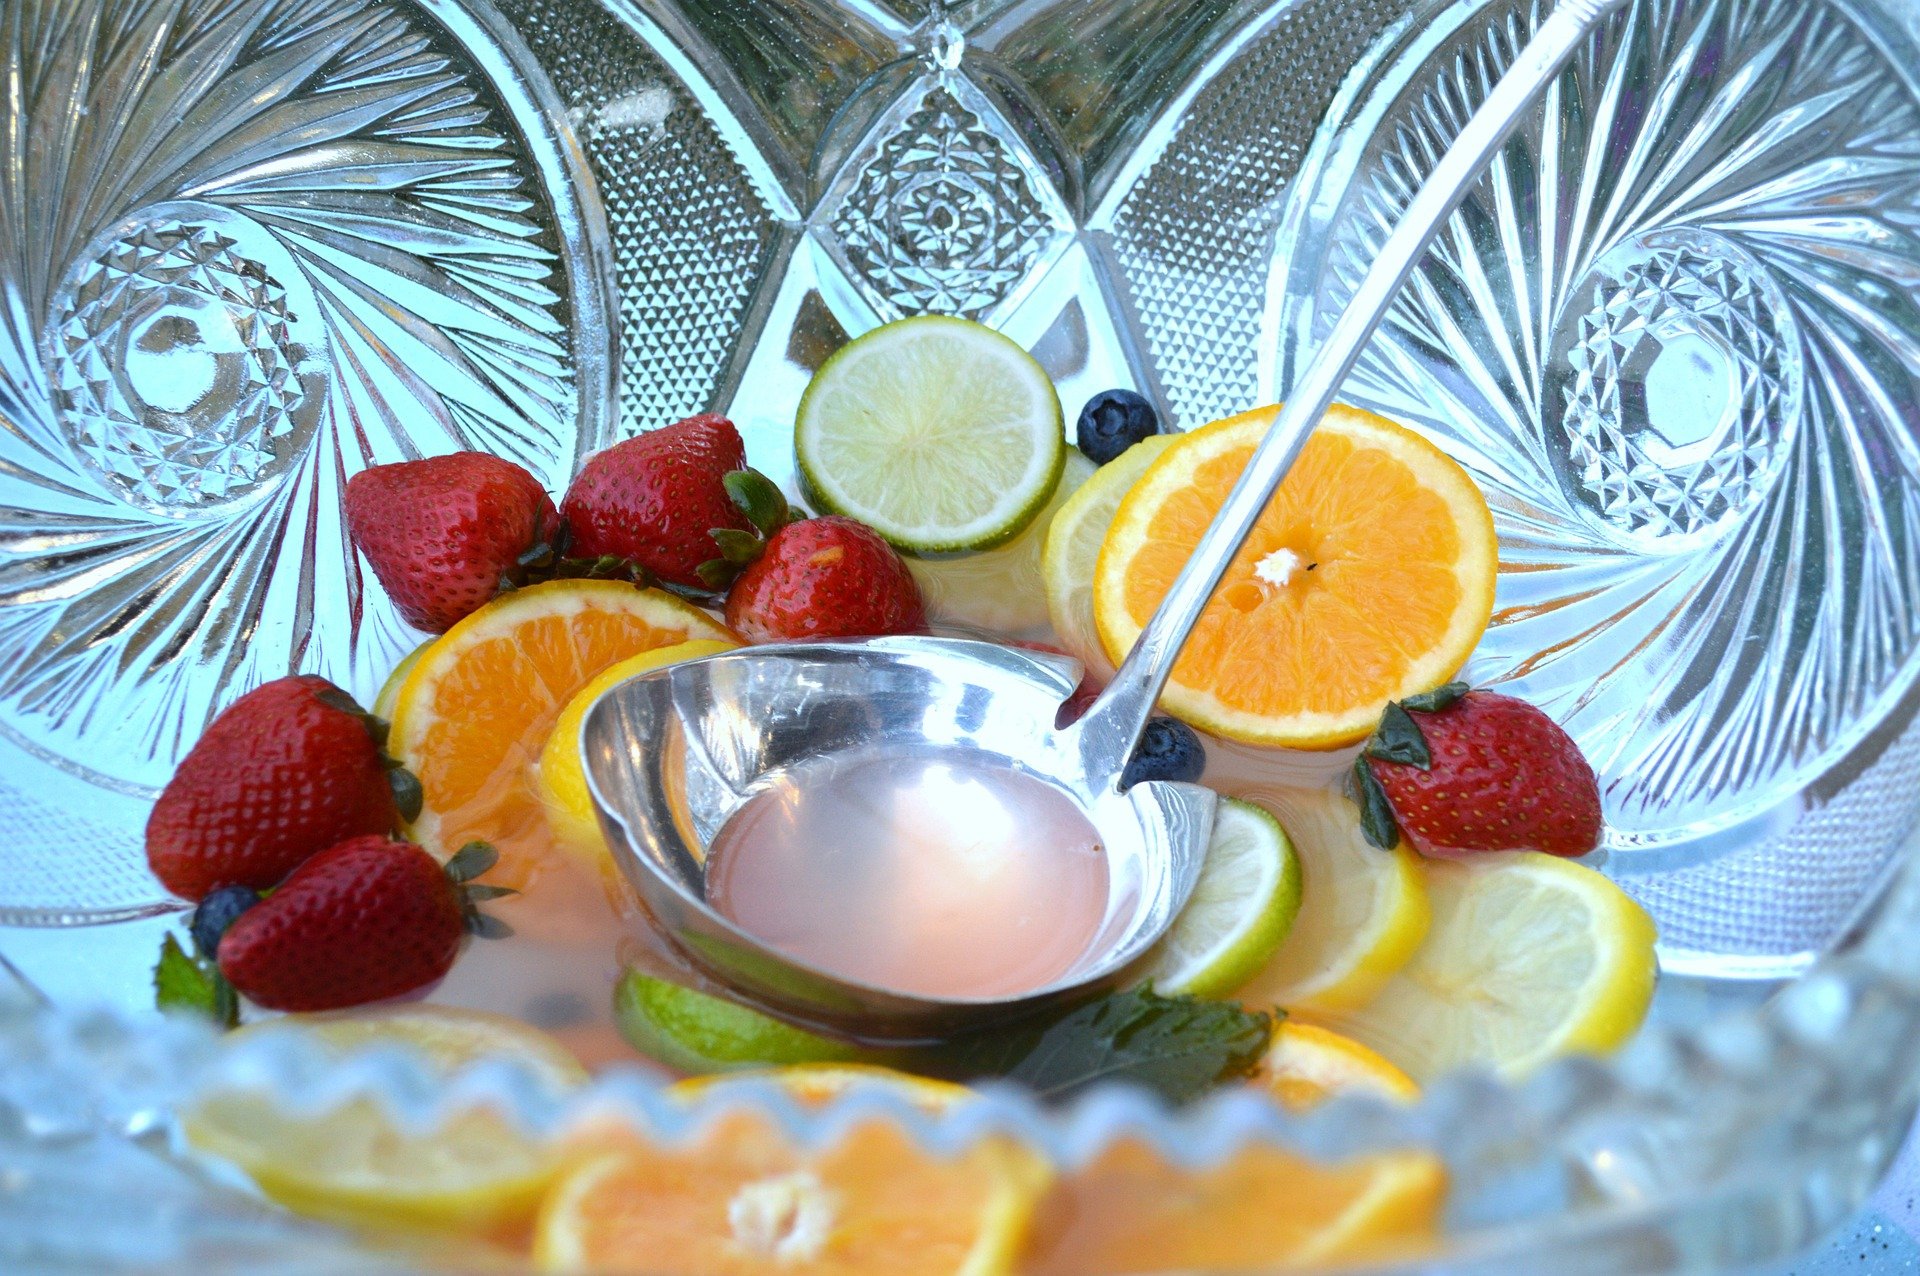 An empty punch bowl. | Photo: Pixabay/TootSweetCarole